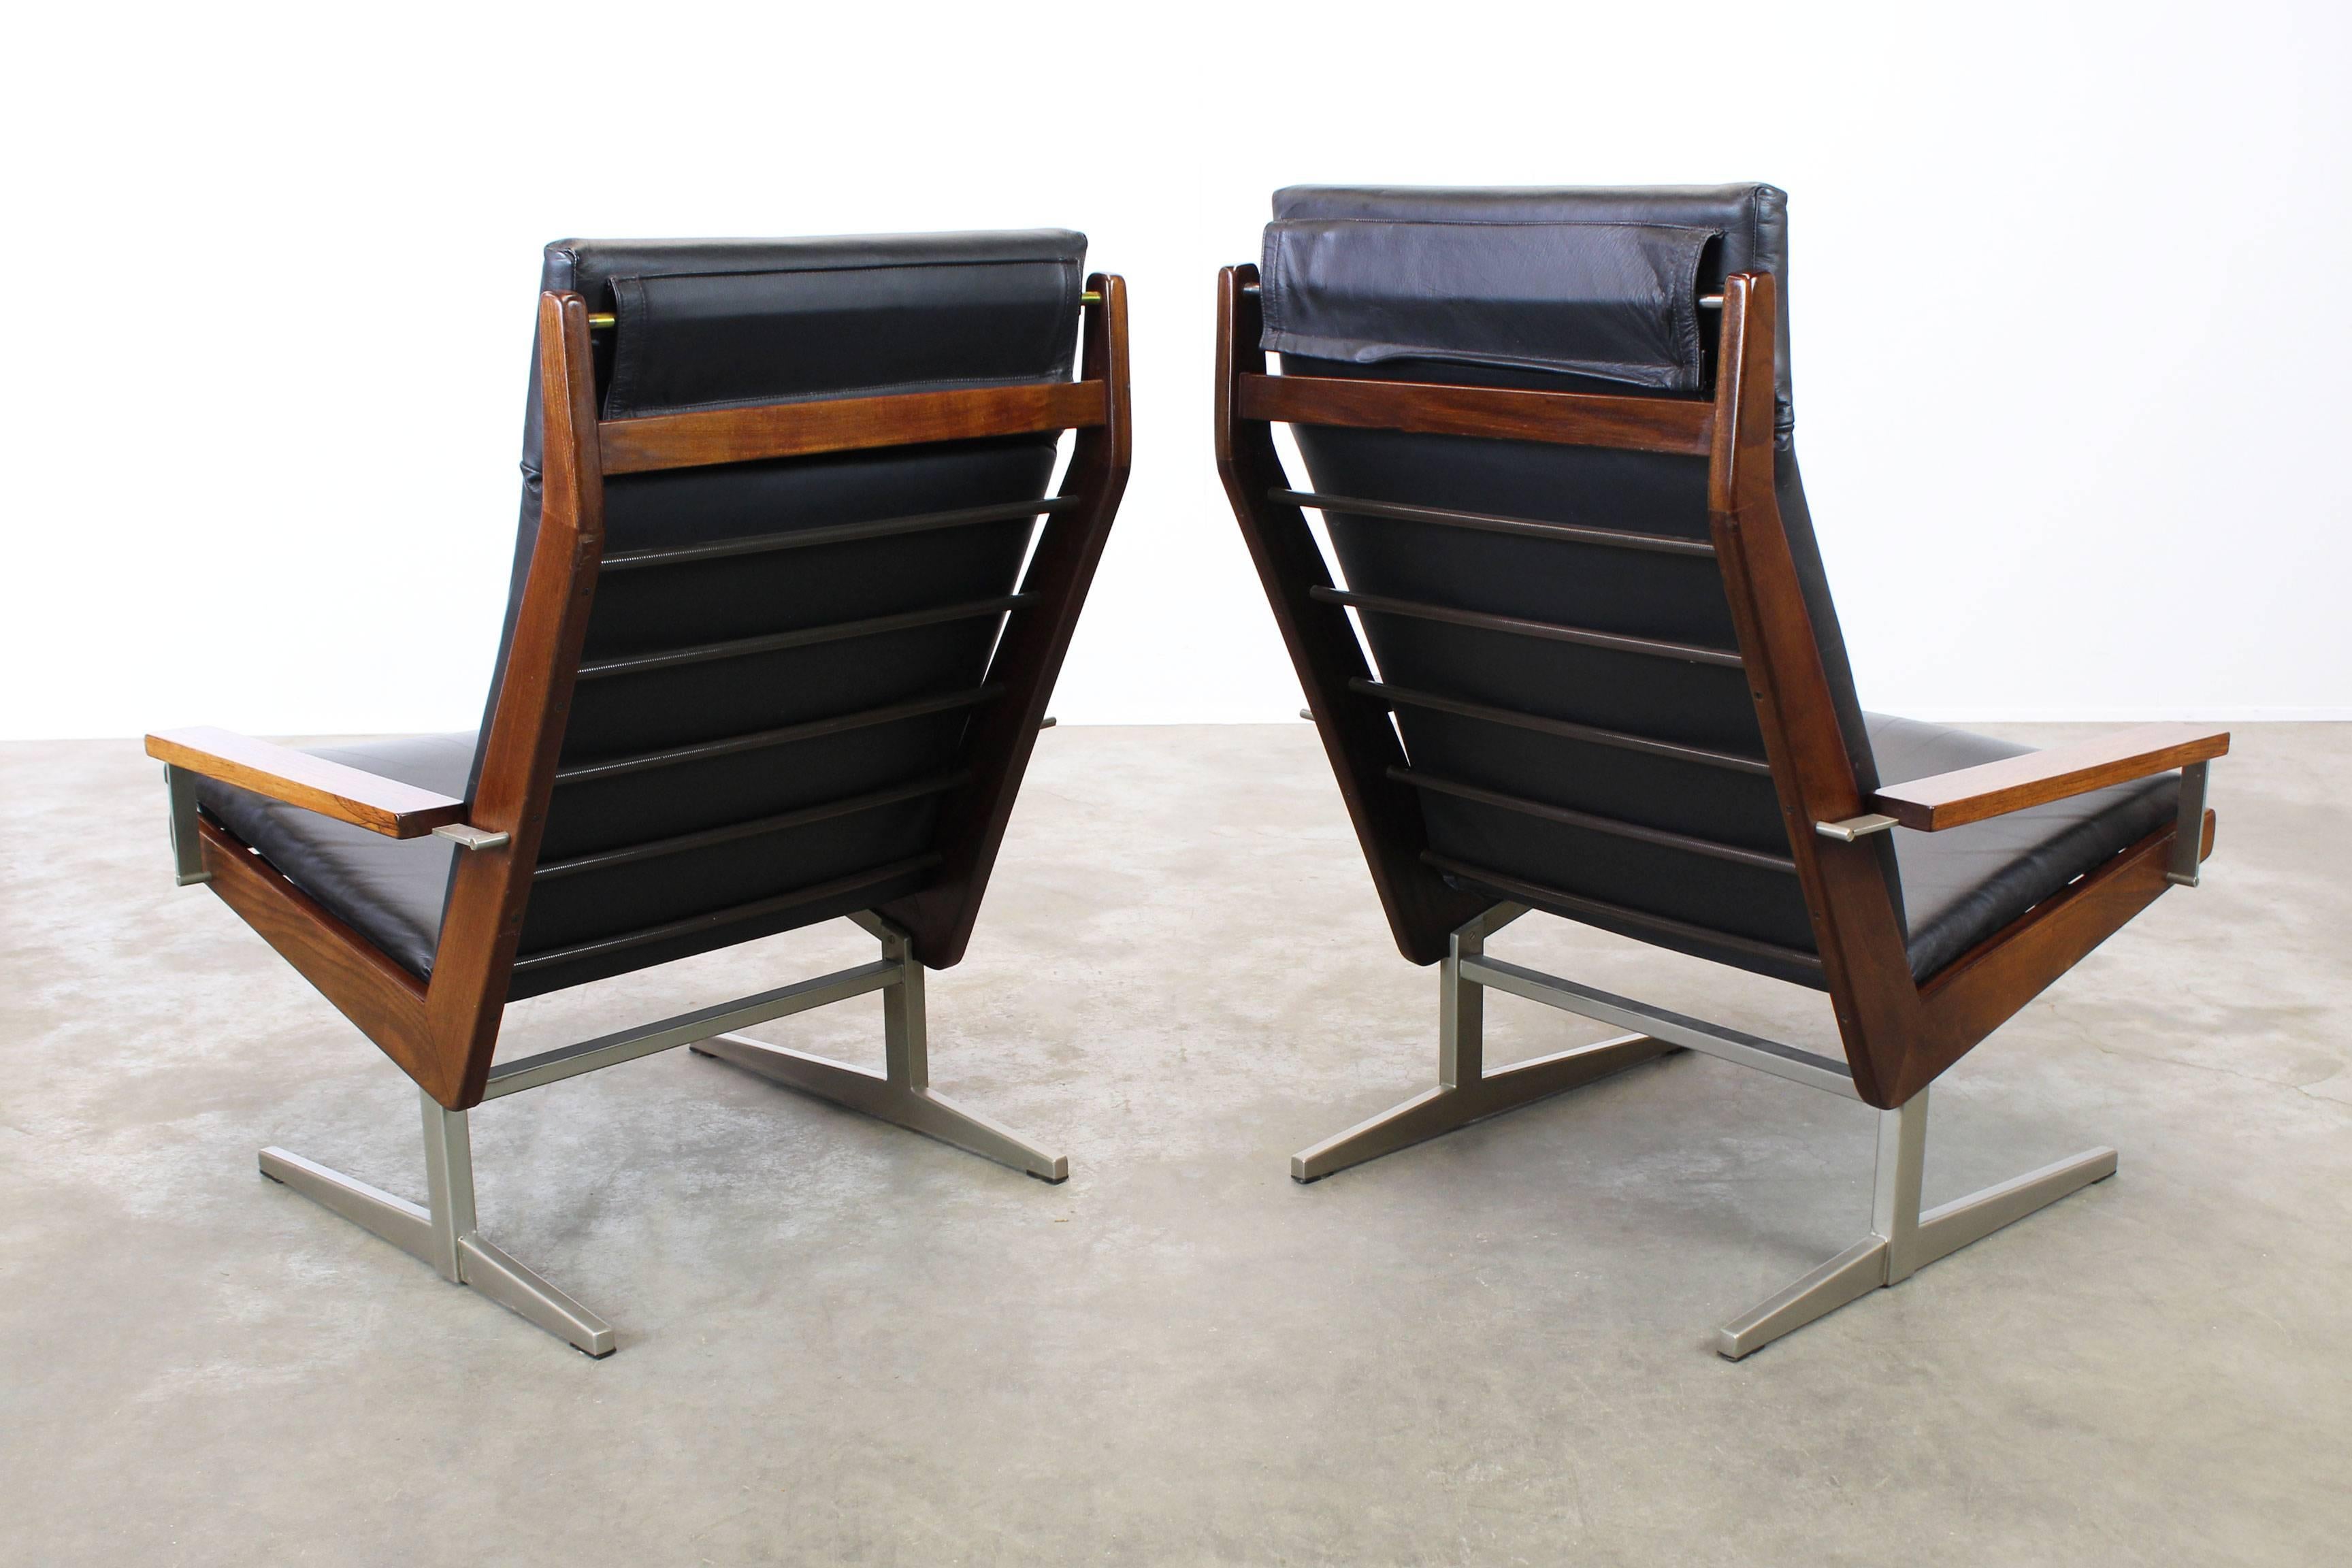 Rare Pair of Lotus Lounge Chairs by Rob Parry for Gelderland 1960 Dutch Design 2